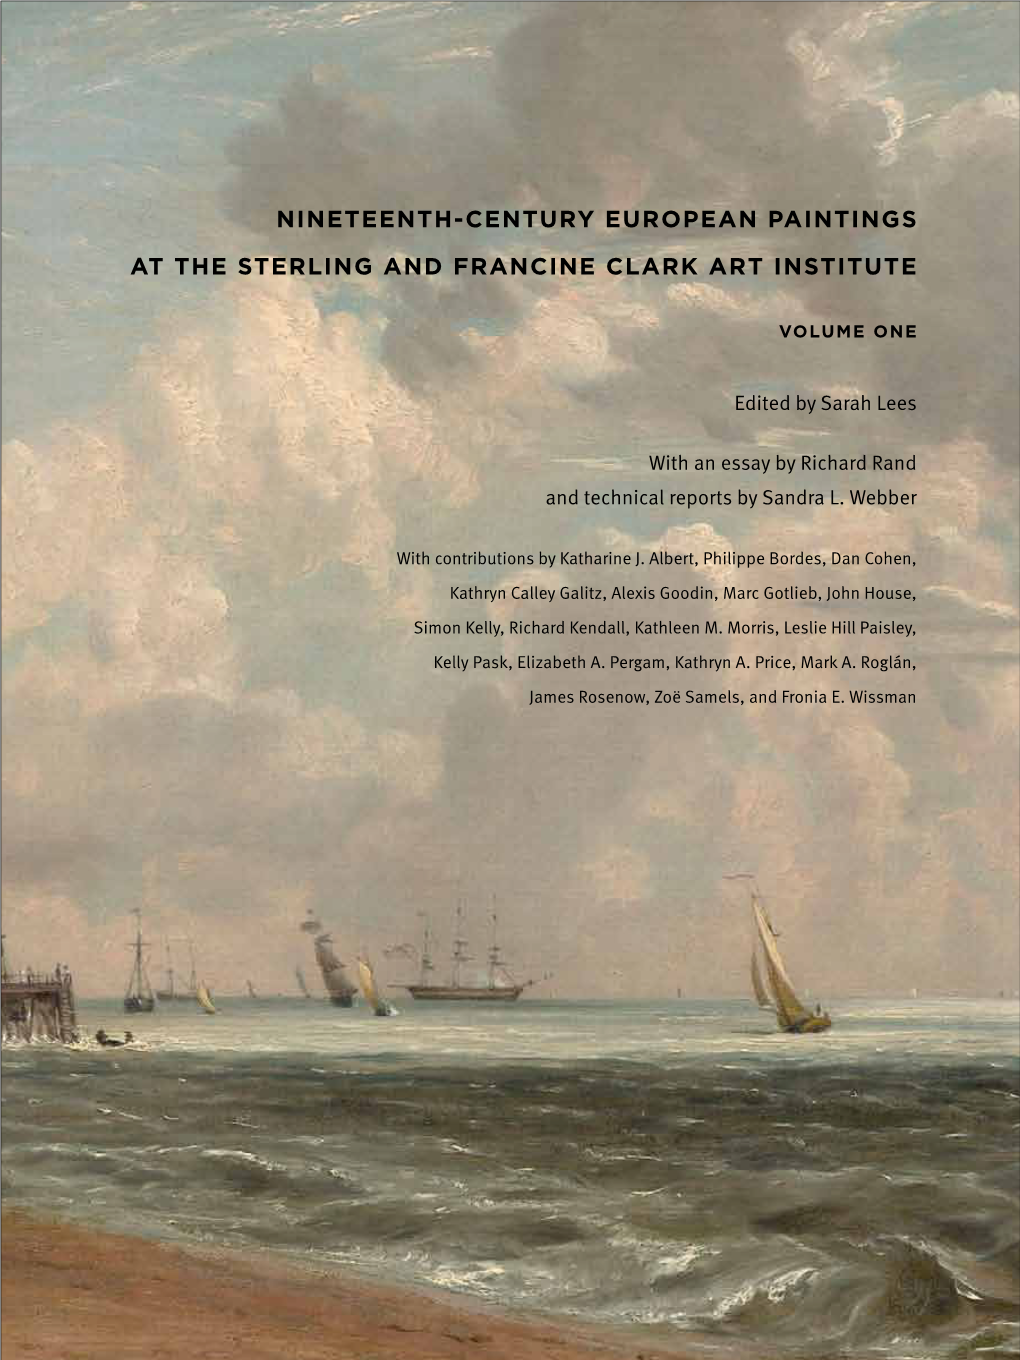 Nineteenth-Century European Paintings Distributed by Yale University Press | New Haven and London at the Sterling and Francine Clark Art Institute